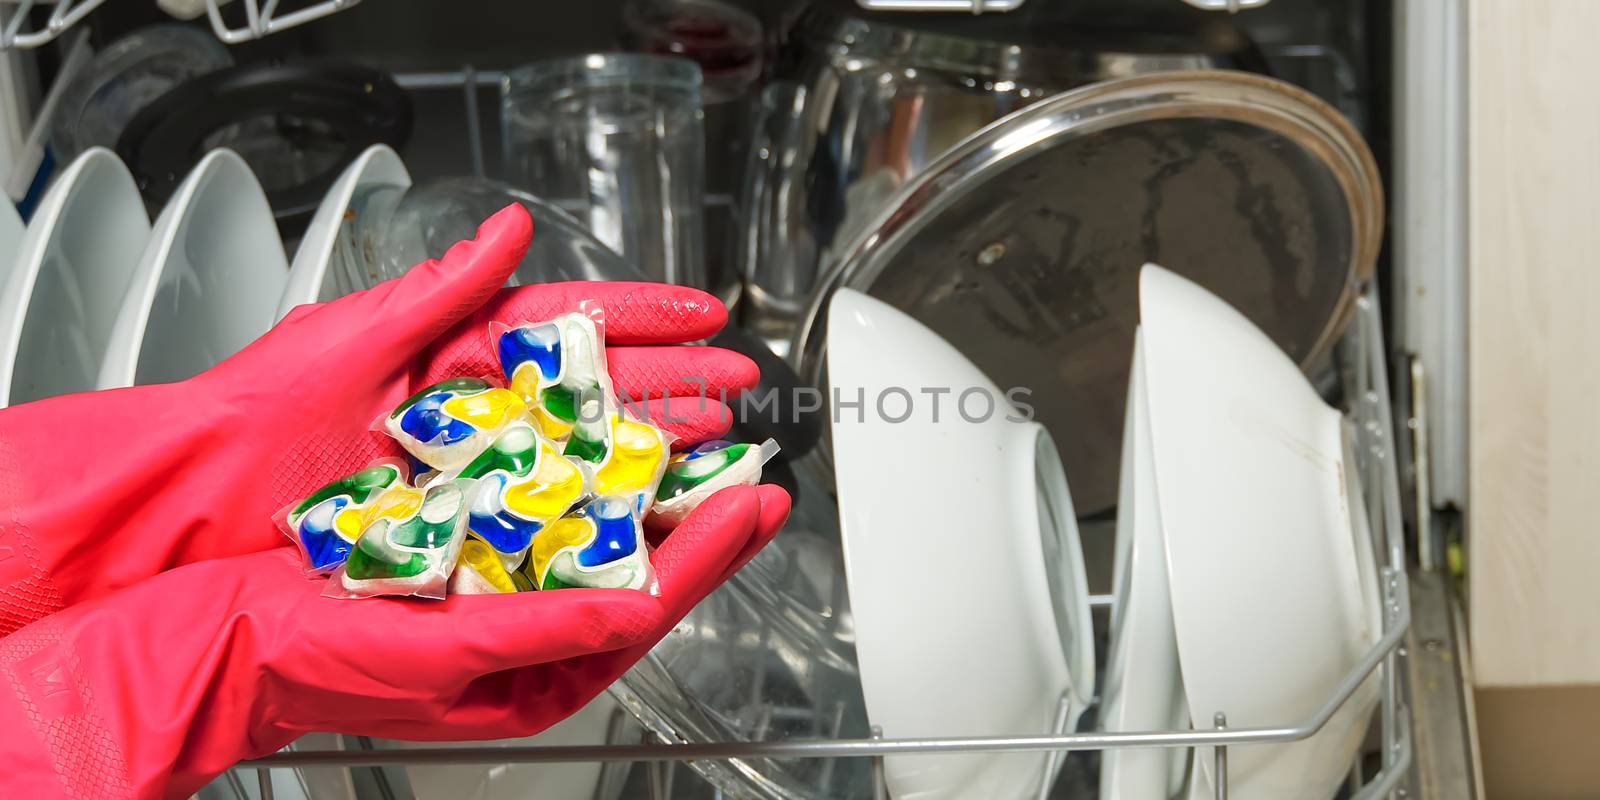 Dishwasher Detergents in hands. hands in pink golvs holds dishwasher gel capsules. Capsule for the dishwasher. Brilliant cleanliness. by PhotoTime